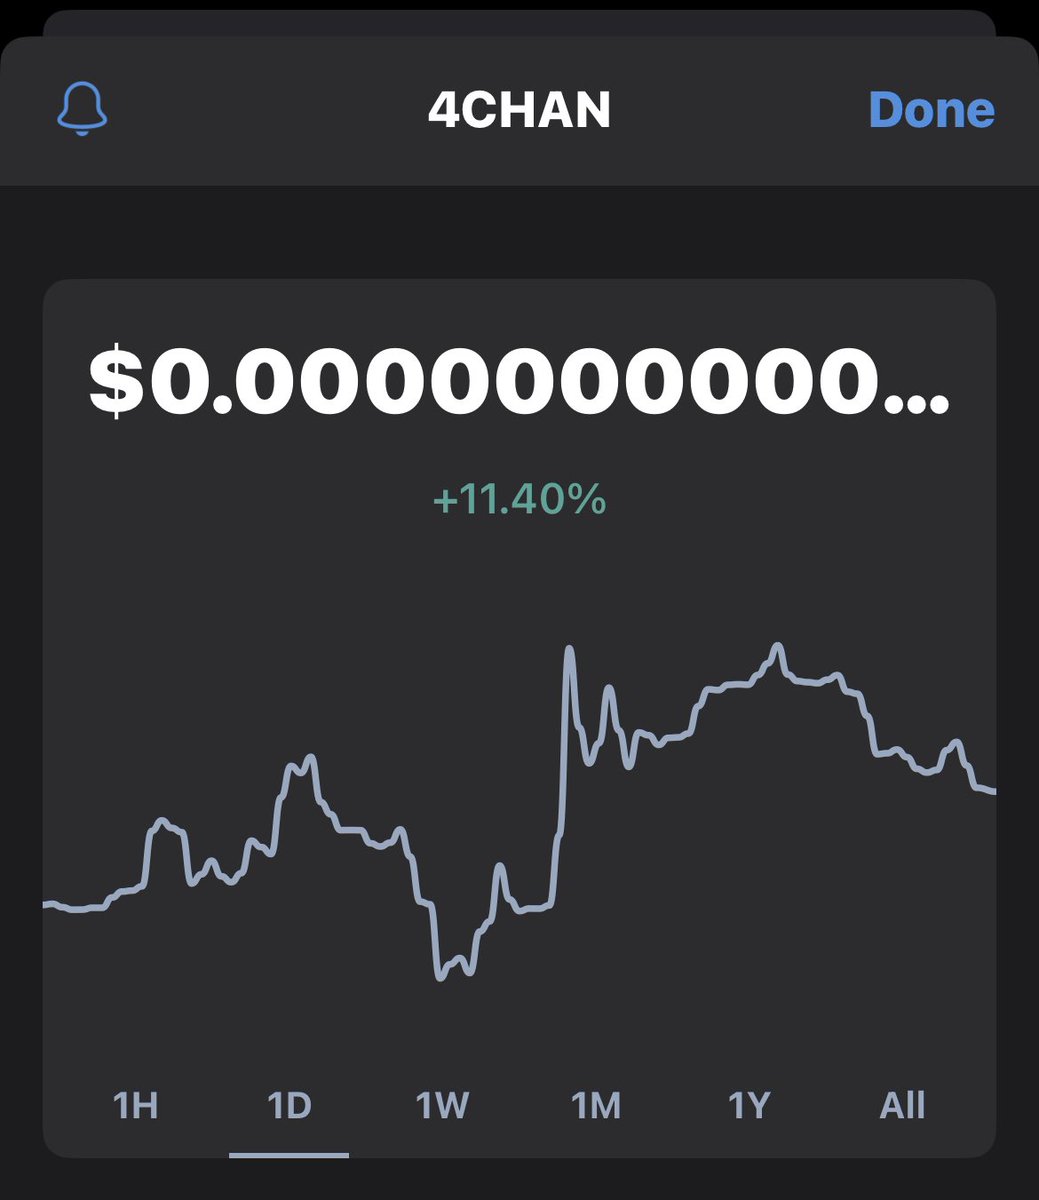 The market is bloody🩸 

Meanwhile #4Chan 🍀 holding strong 

4,145 holders 

#4ChanFam #BITCOIN #btc #ETH #Crypto